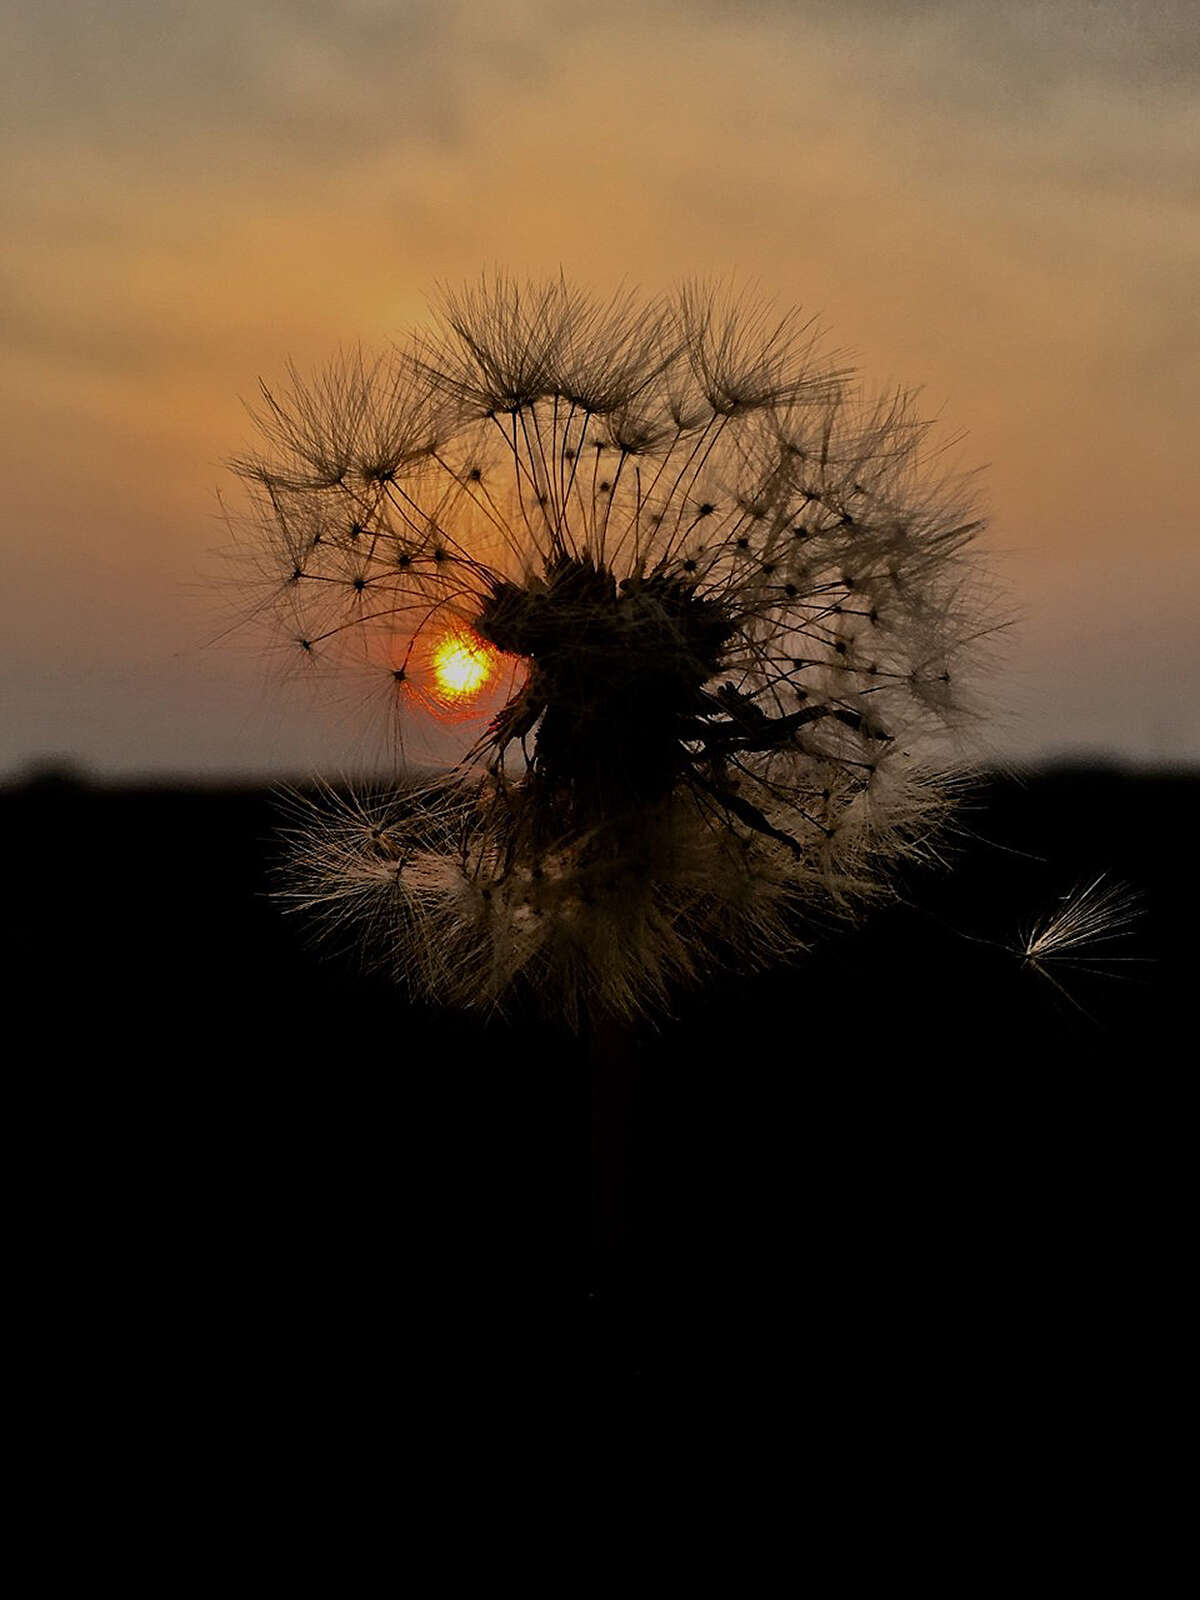 The glow of the setting sun pokes through a wind-blown dandelion.